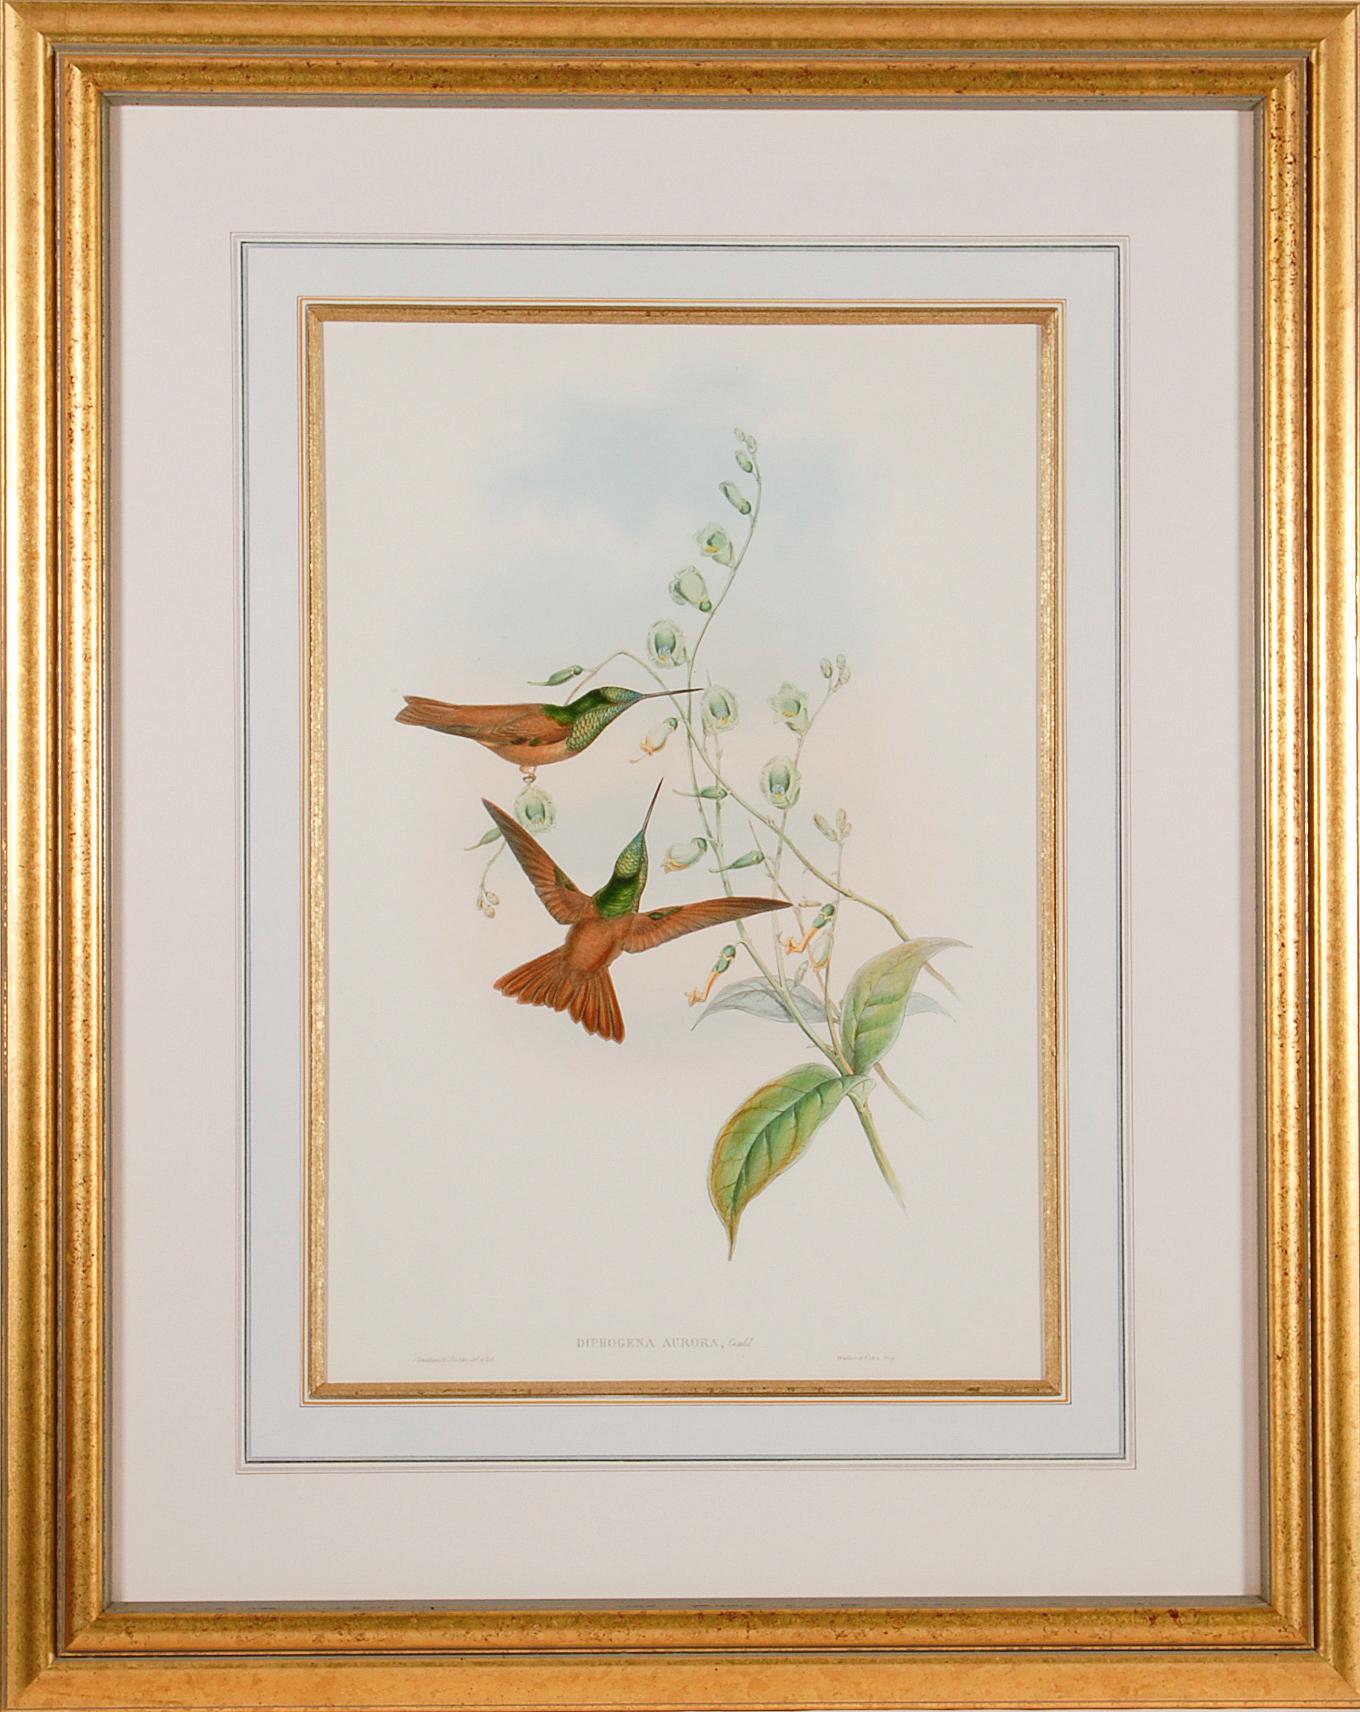 John Gould and Henry Constantine Richter Animal Print - Bolivian Rainbow Hummingbirds: A Framed 19th C. Hand-colored Lithograph by Gould